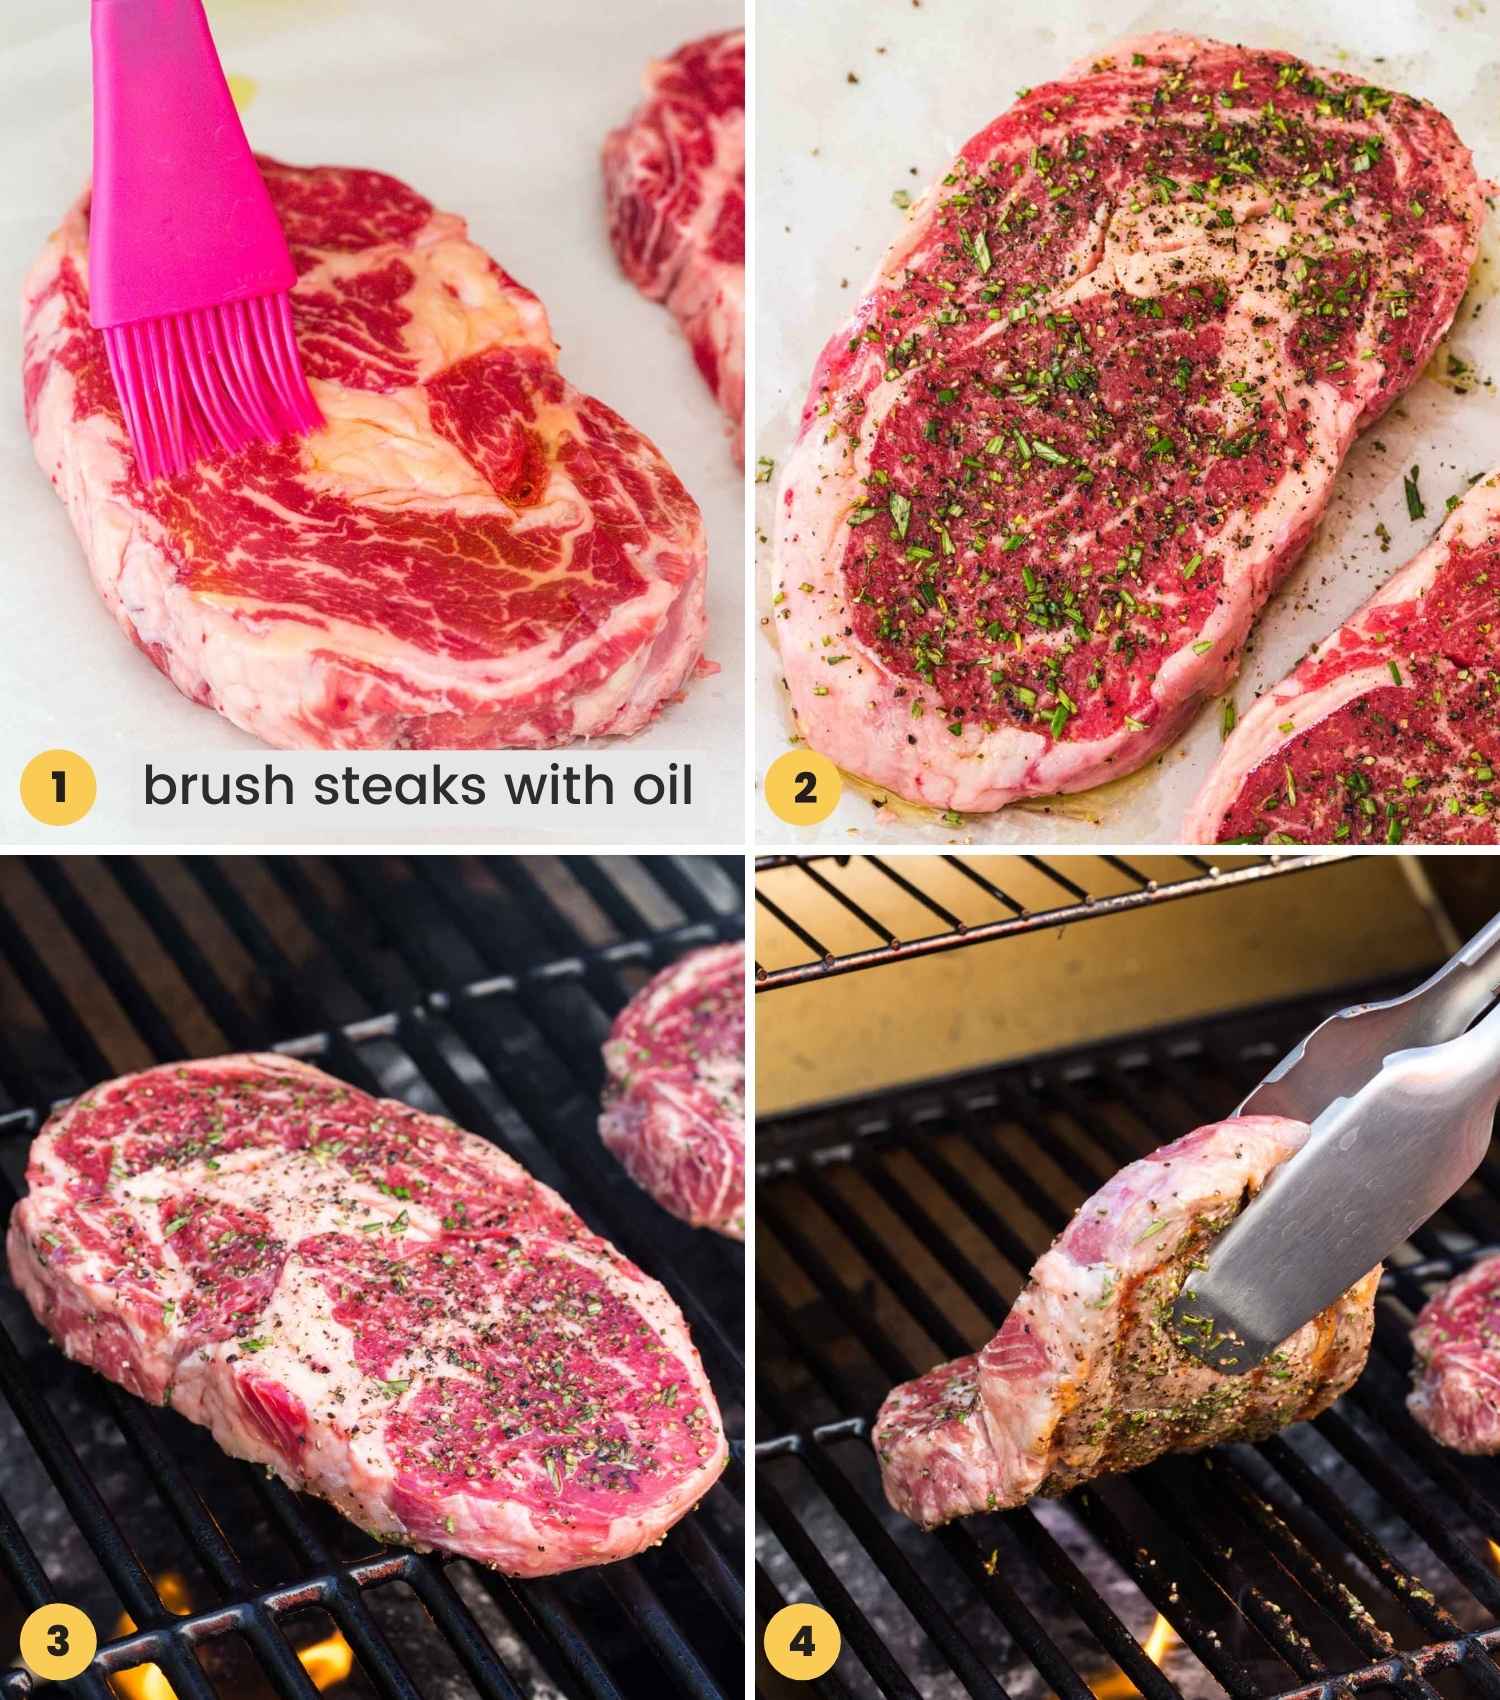 A collage with 4 images showing how to season and grill steak